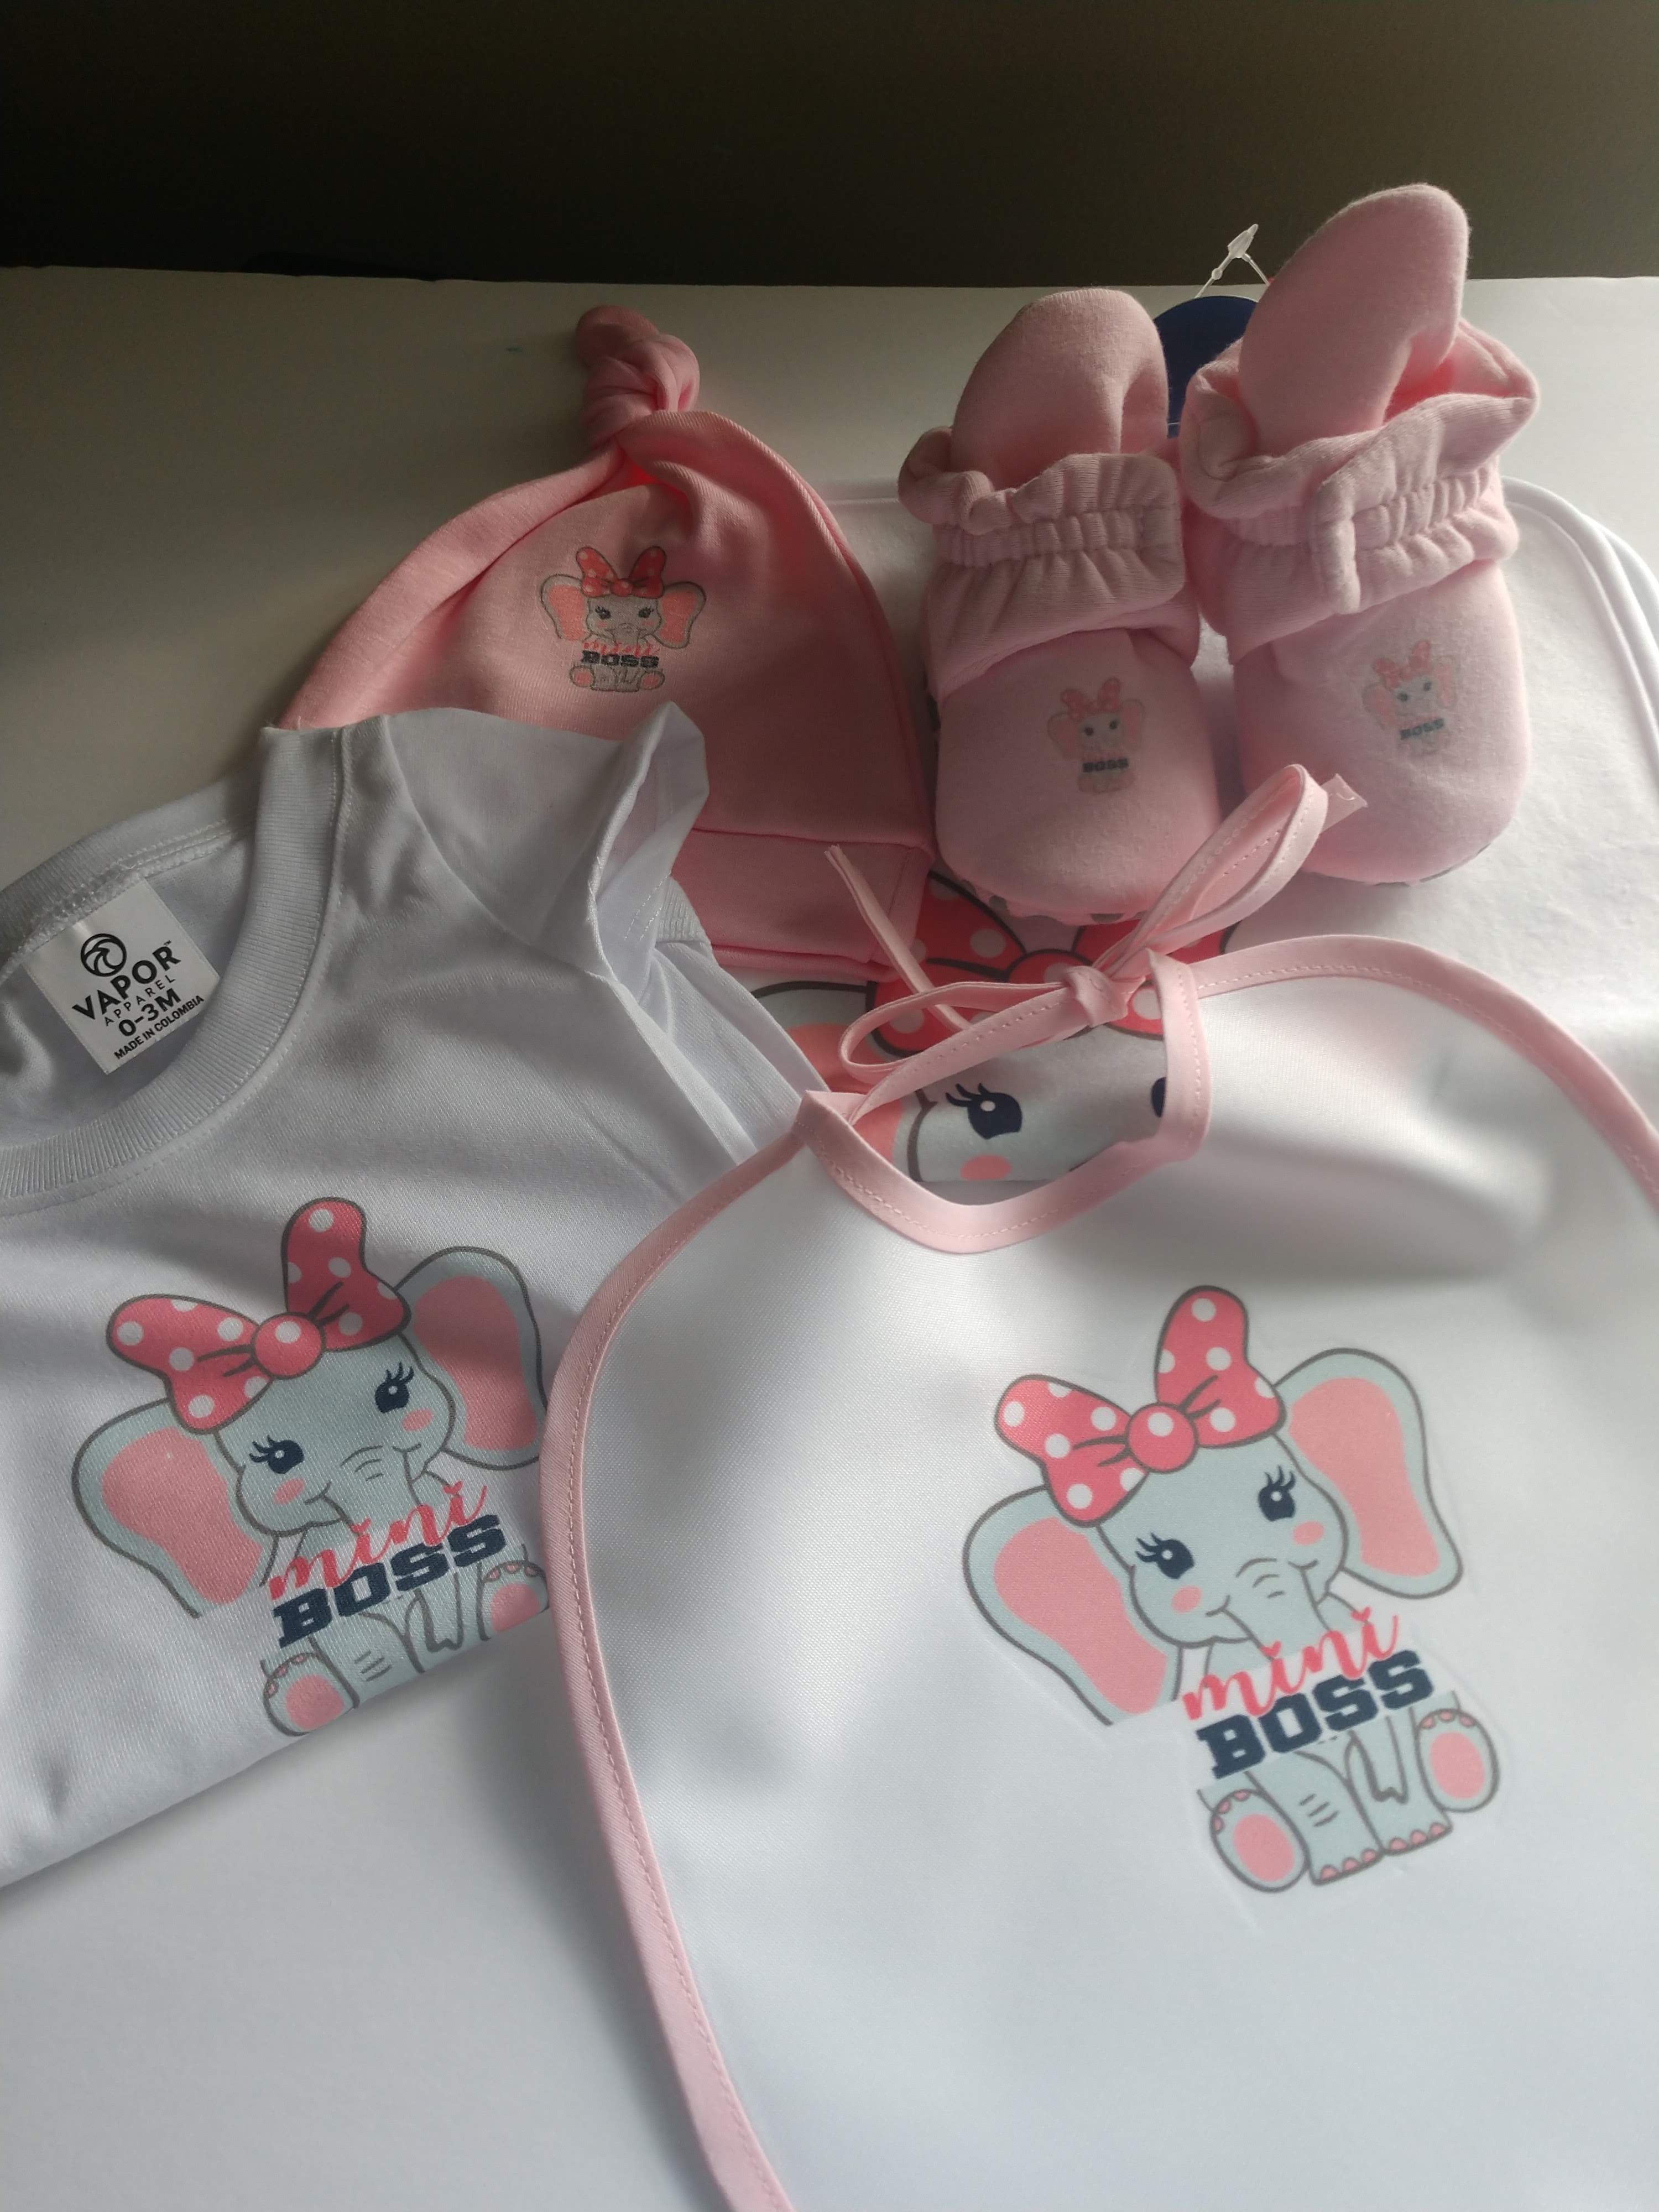 Used baby bodysuit, mini blanket and bib from Conde